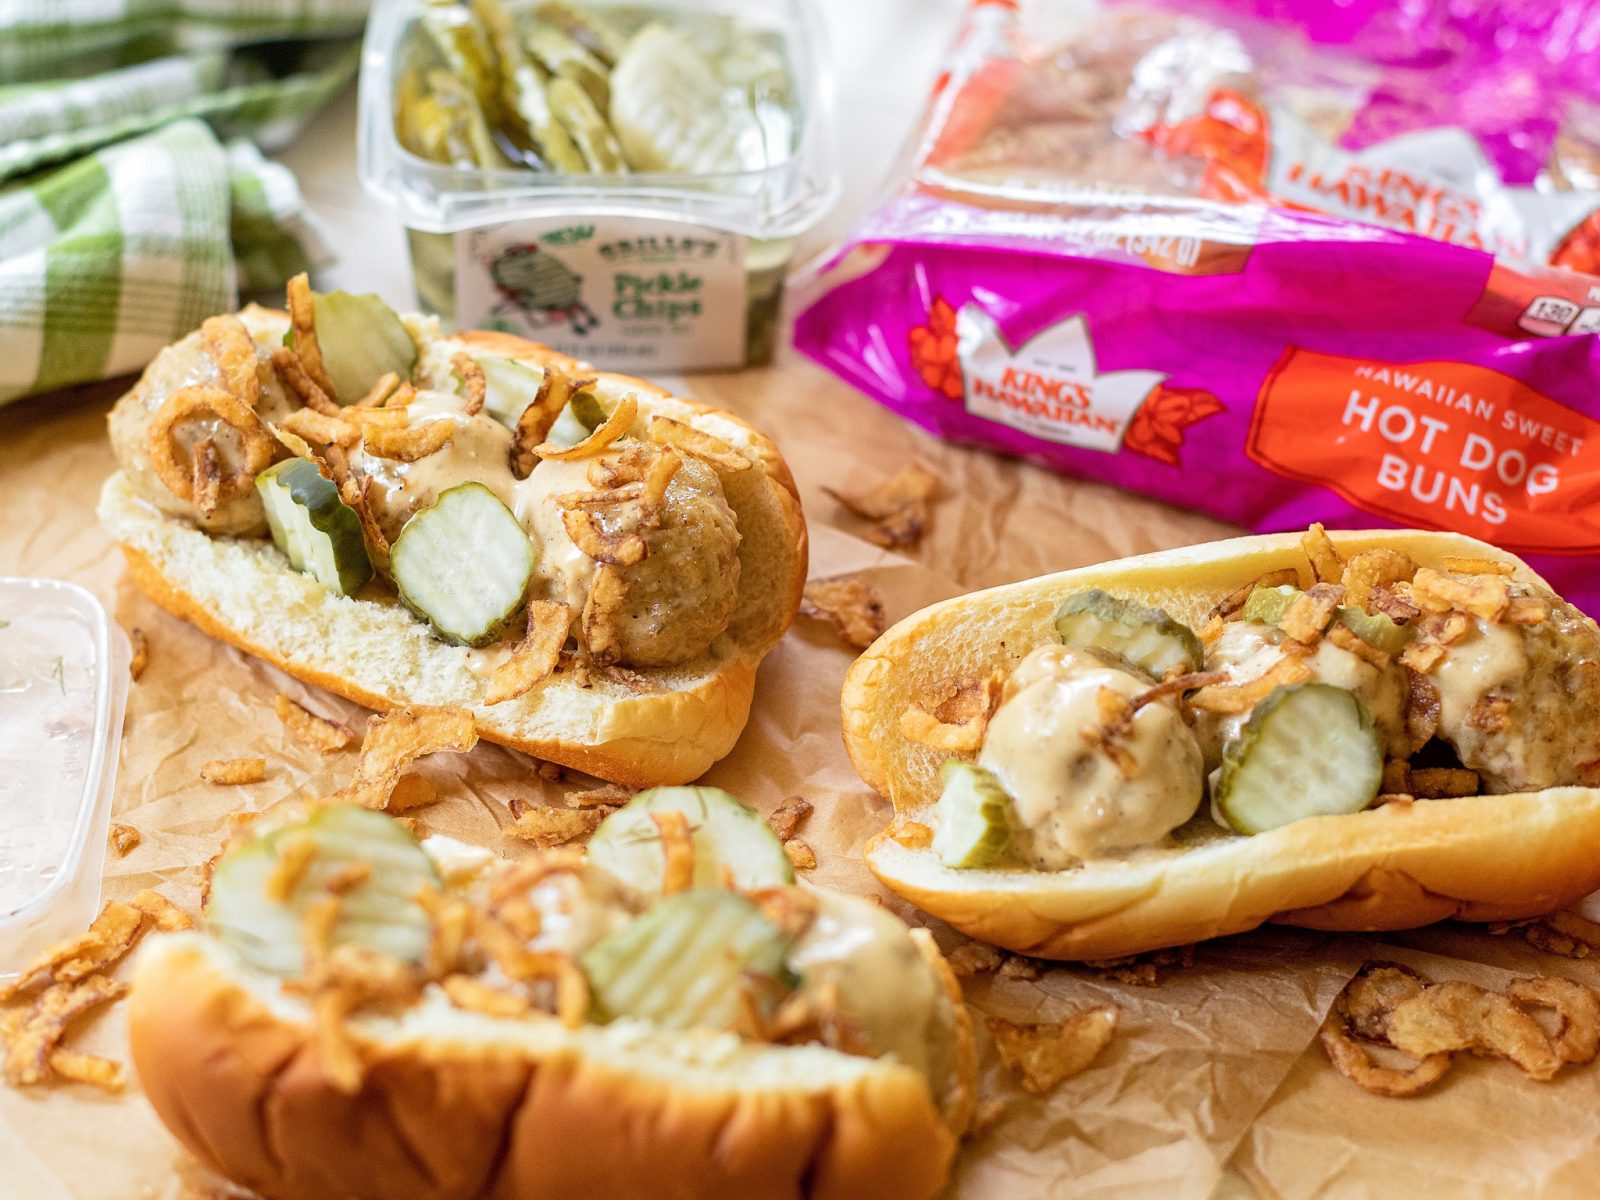 Shake Up Your Game Day Menu With A Batch Of Chicken Meatball Subs With Alabama White Sauce